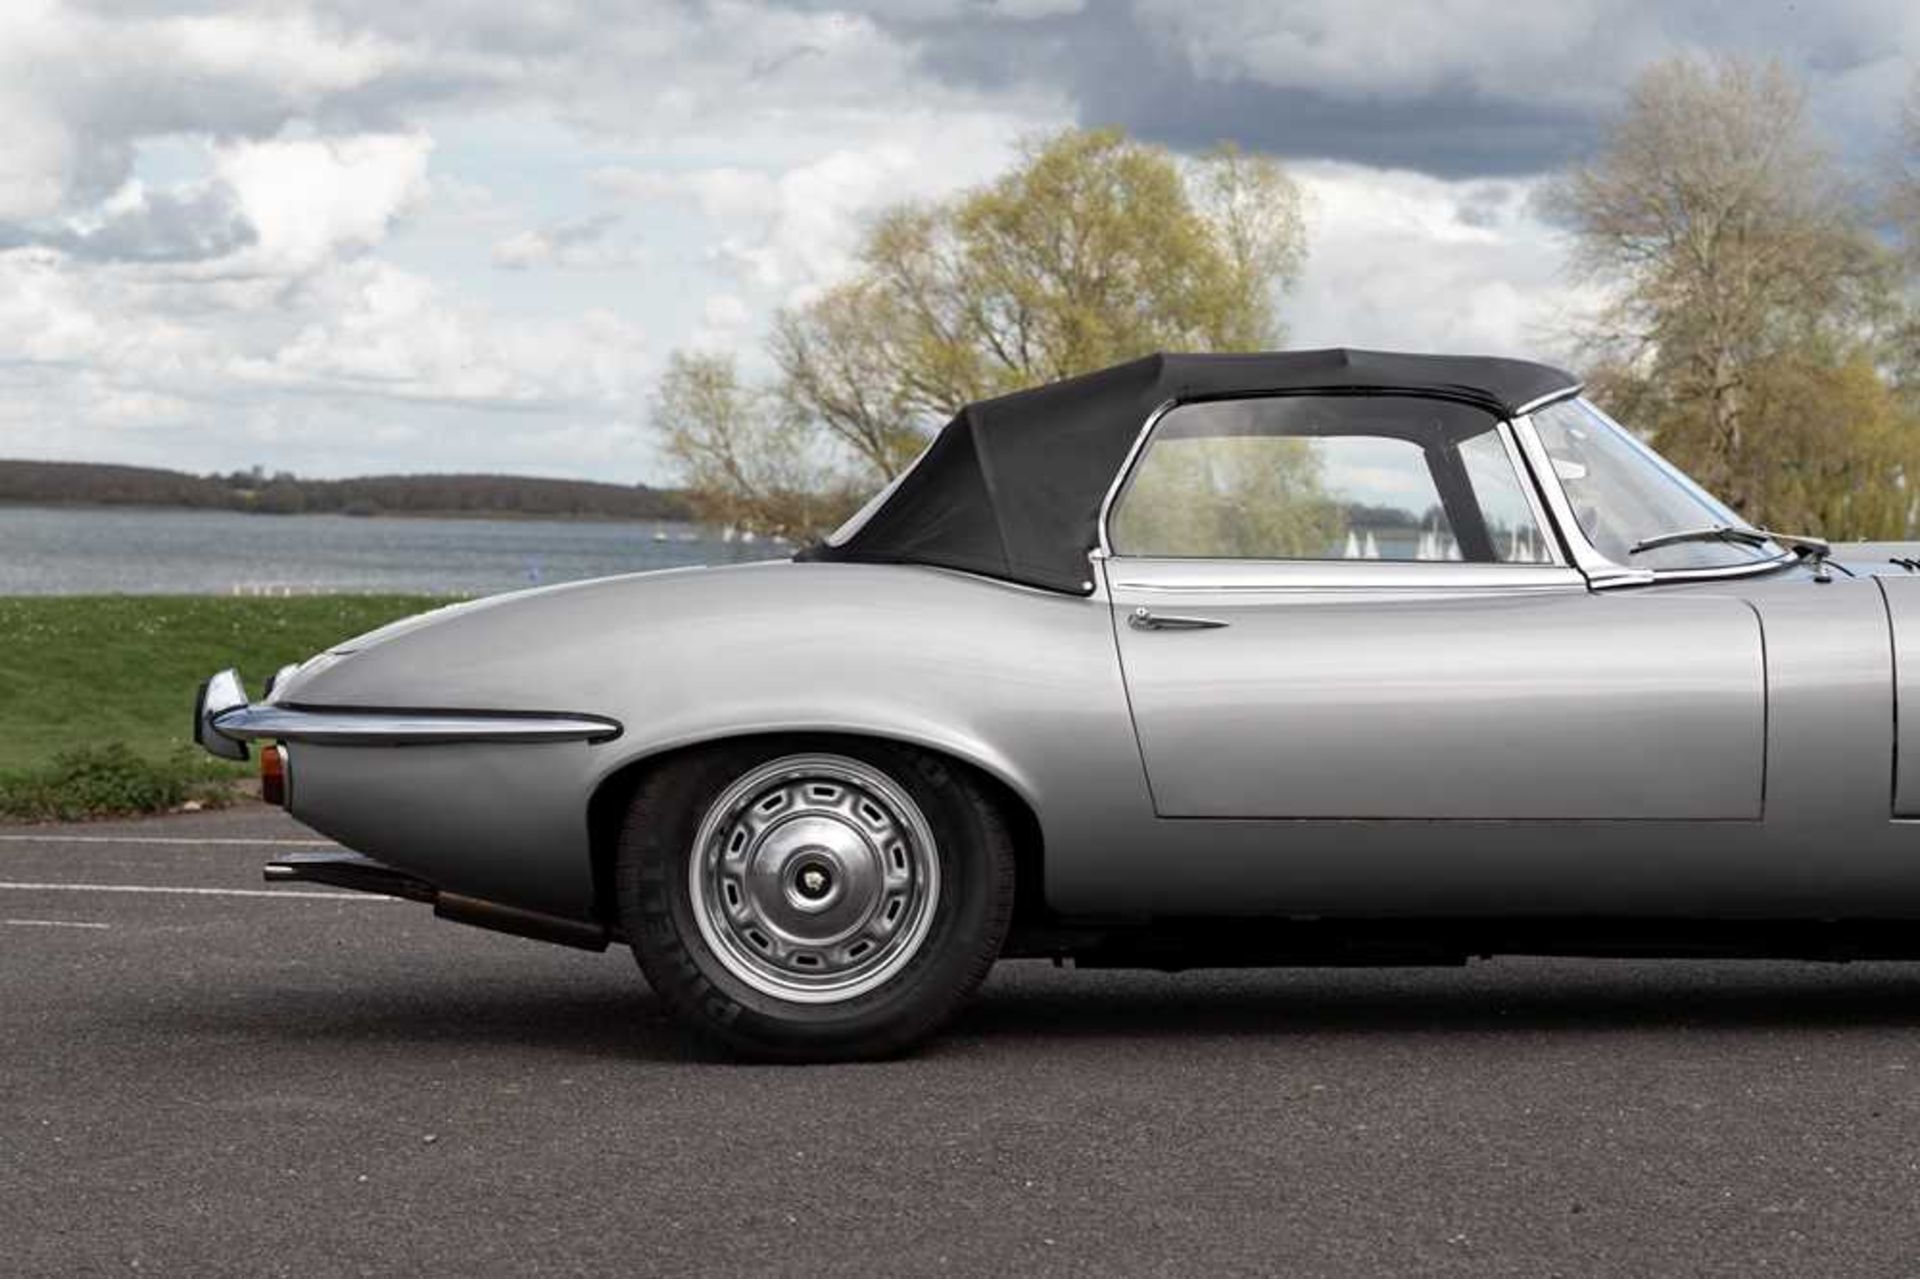 1974 Jaguar E-Type Series III V12 Roadster Only one family owner and 54,412 miles from new - Image 35 of 89